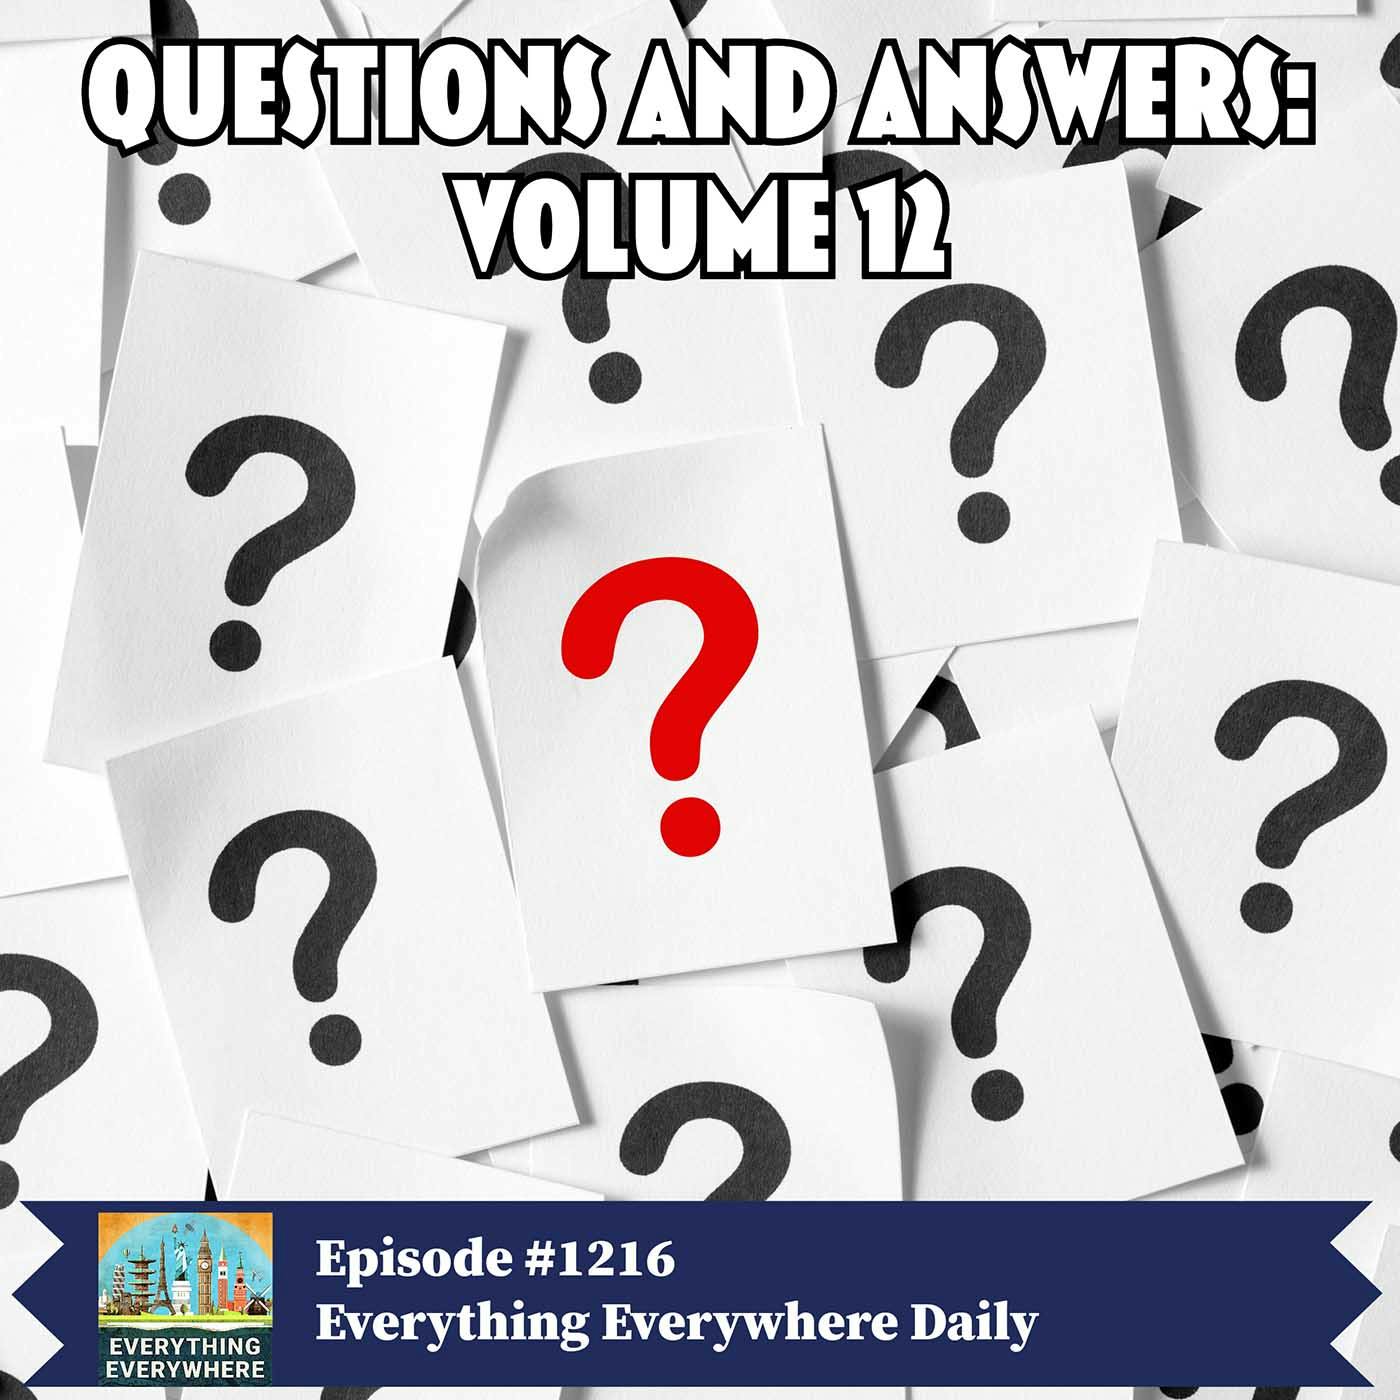 Questions and Answers: Volume 12